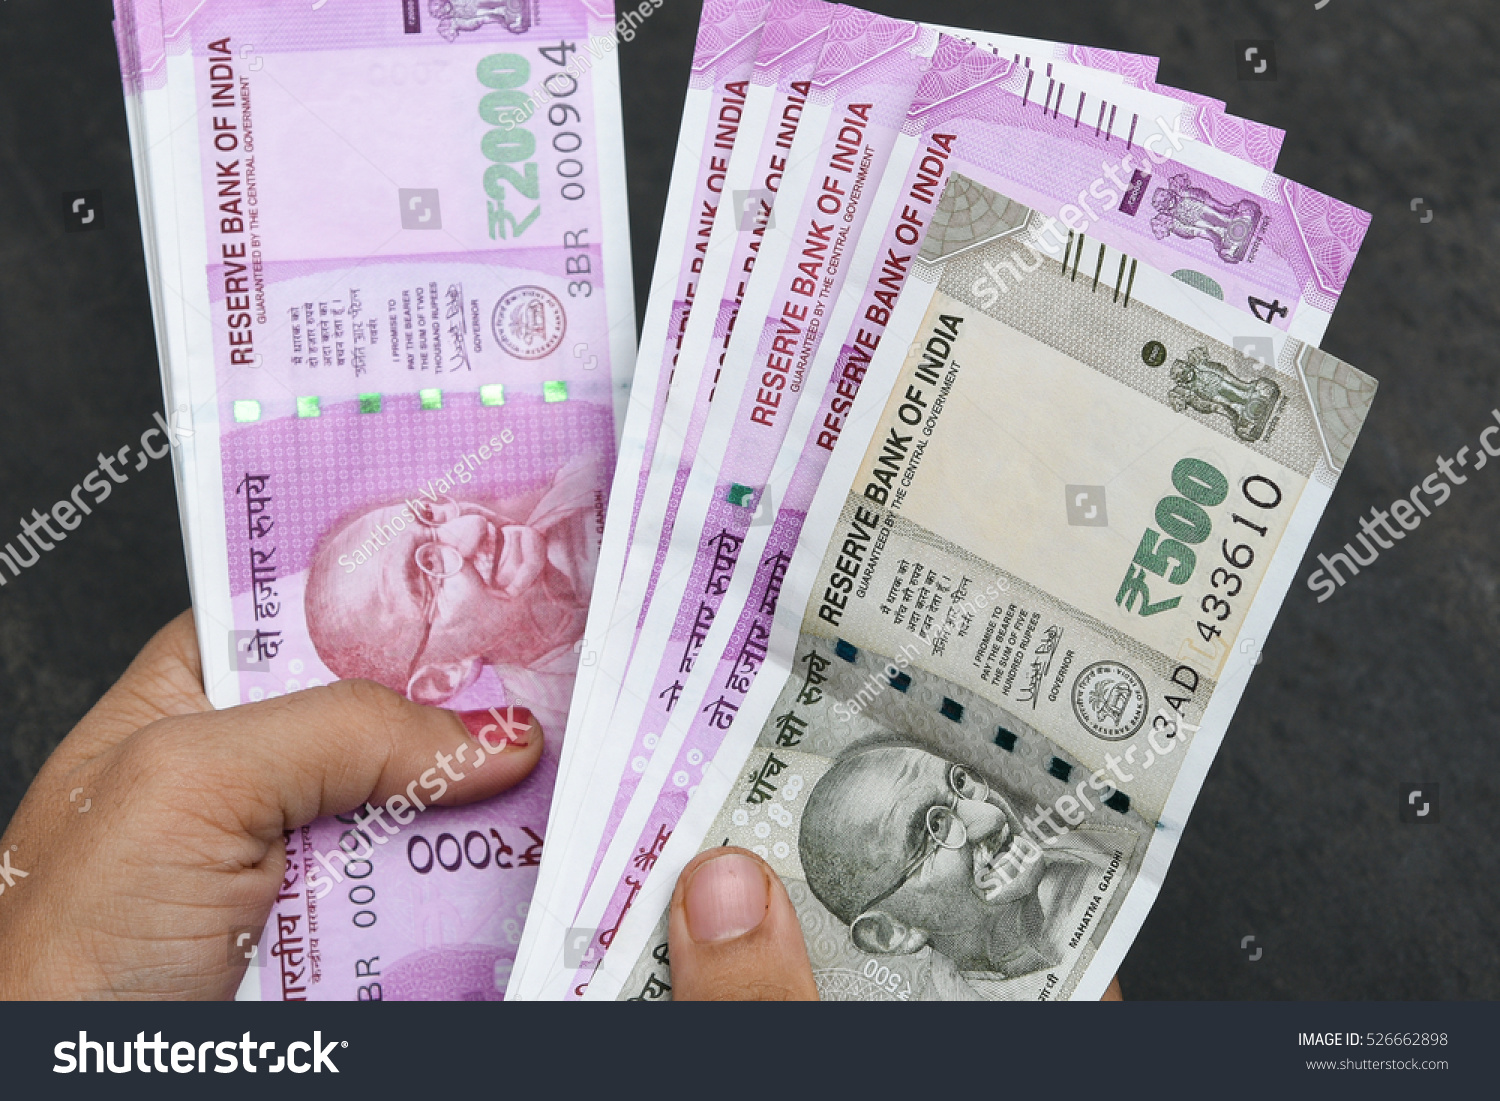 2000 and 500 rupee banknote India,The brand new Indian currency notes of 2000 and 500 rupees isolated on black. Business woman holding counting money. Success and got profit from business #526662898